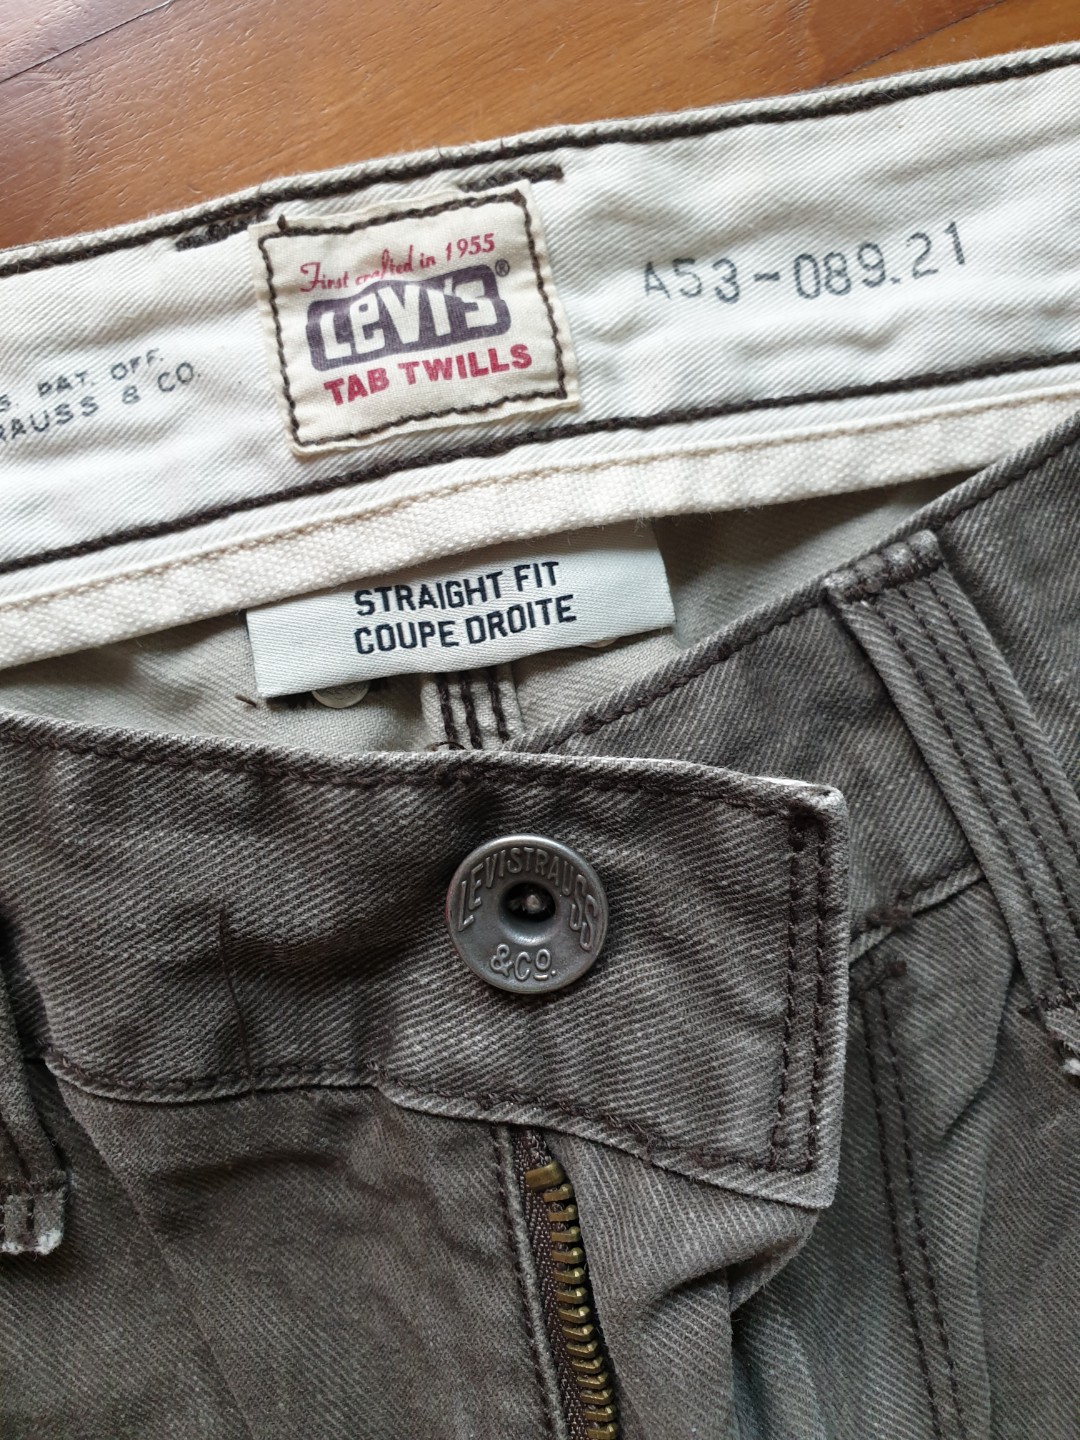 Levi's tab Twills jeans W34 L28, Men's Fashion, Bottoms, Jeans on Carousell